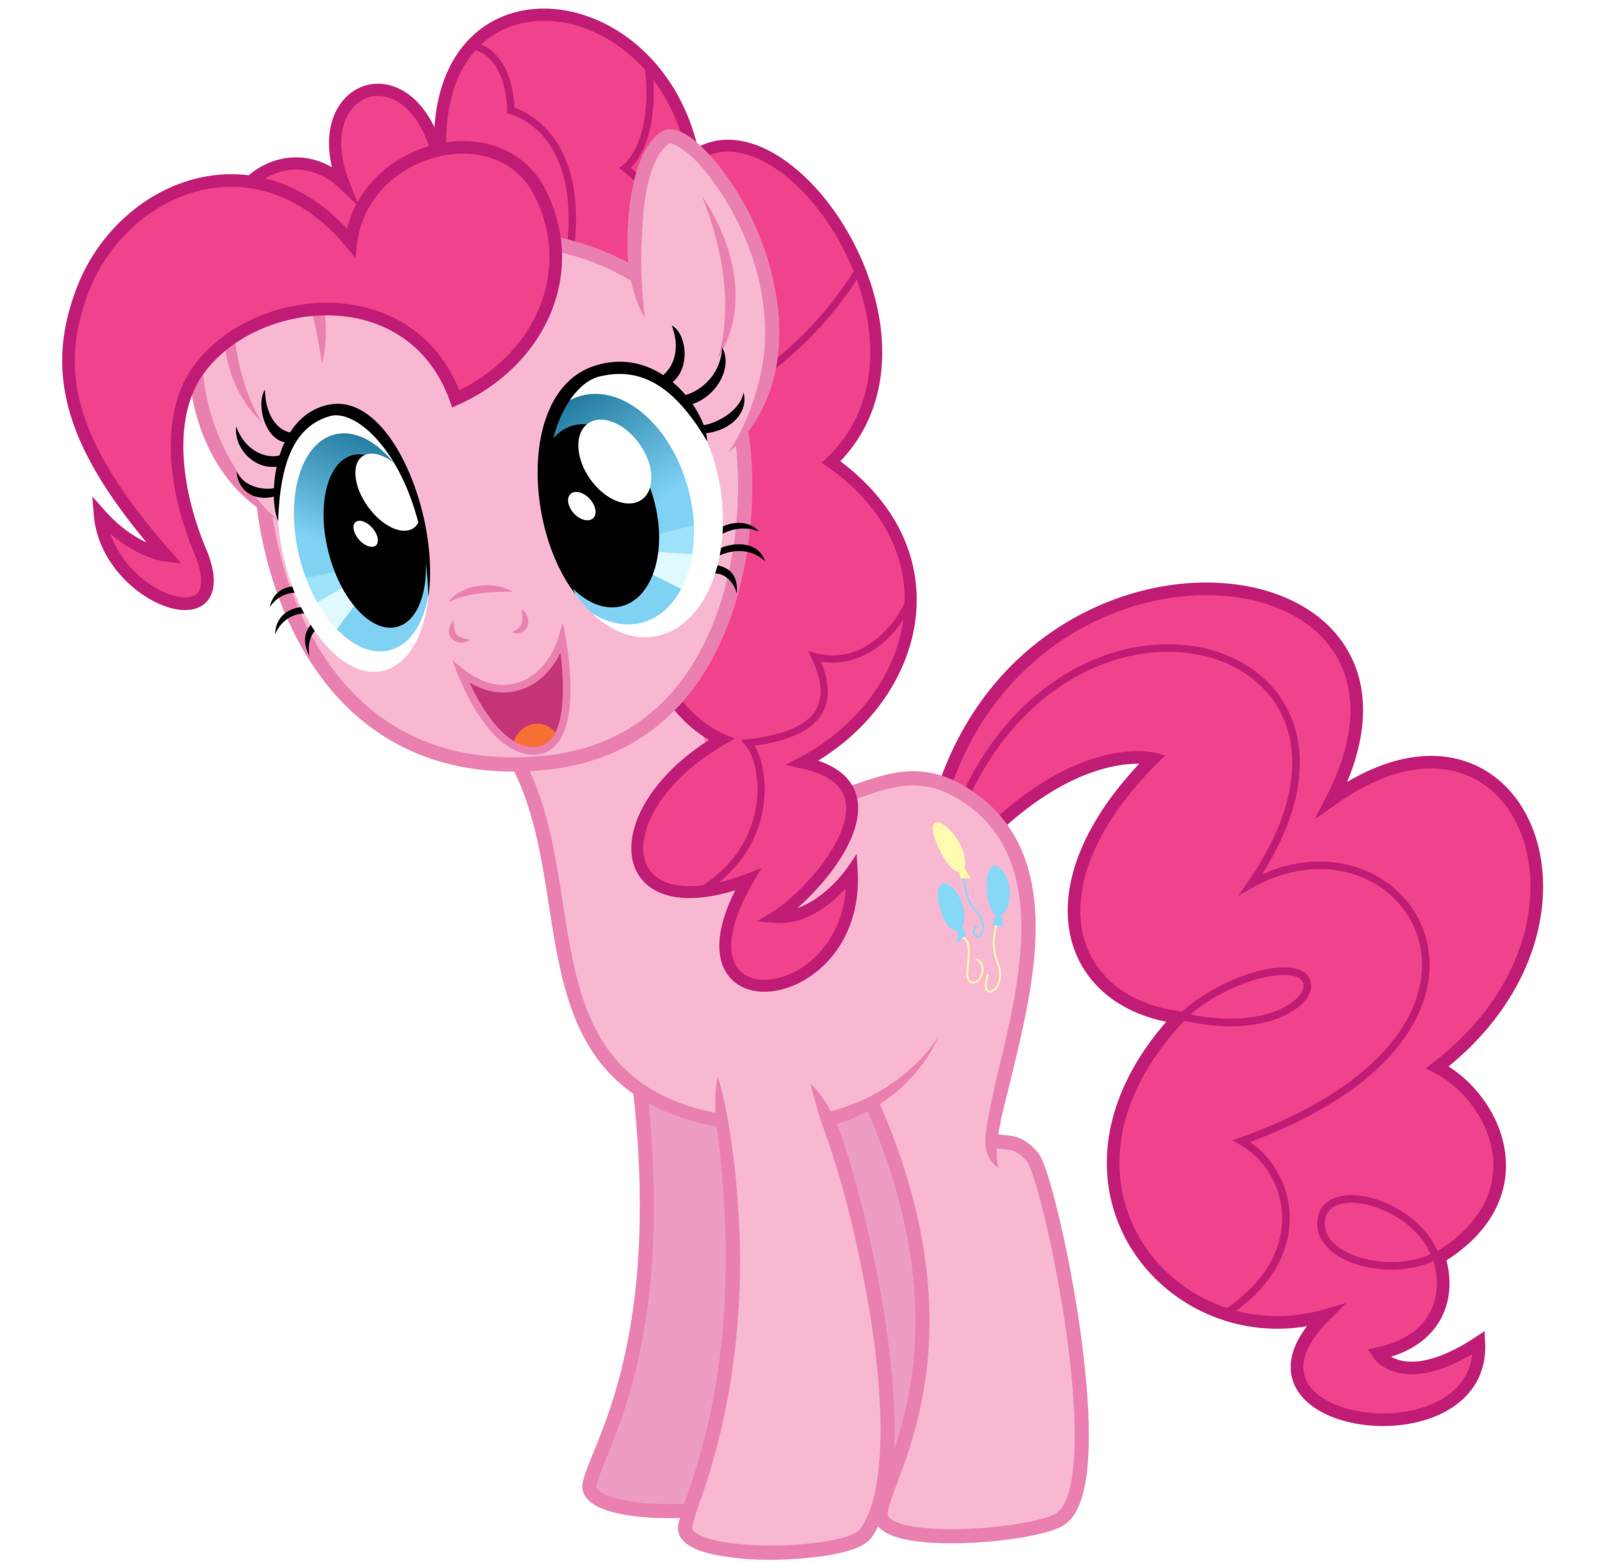 http://chronicle.su/wp-content/uploads/pinkie-pie.png